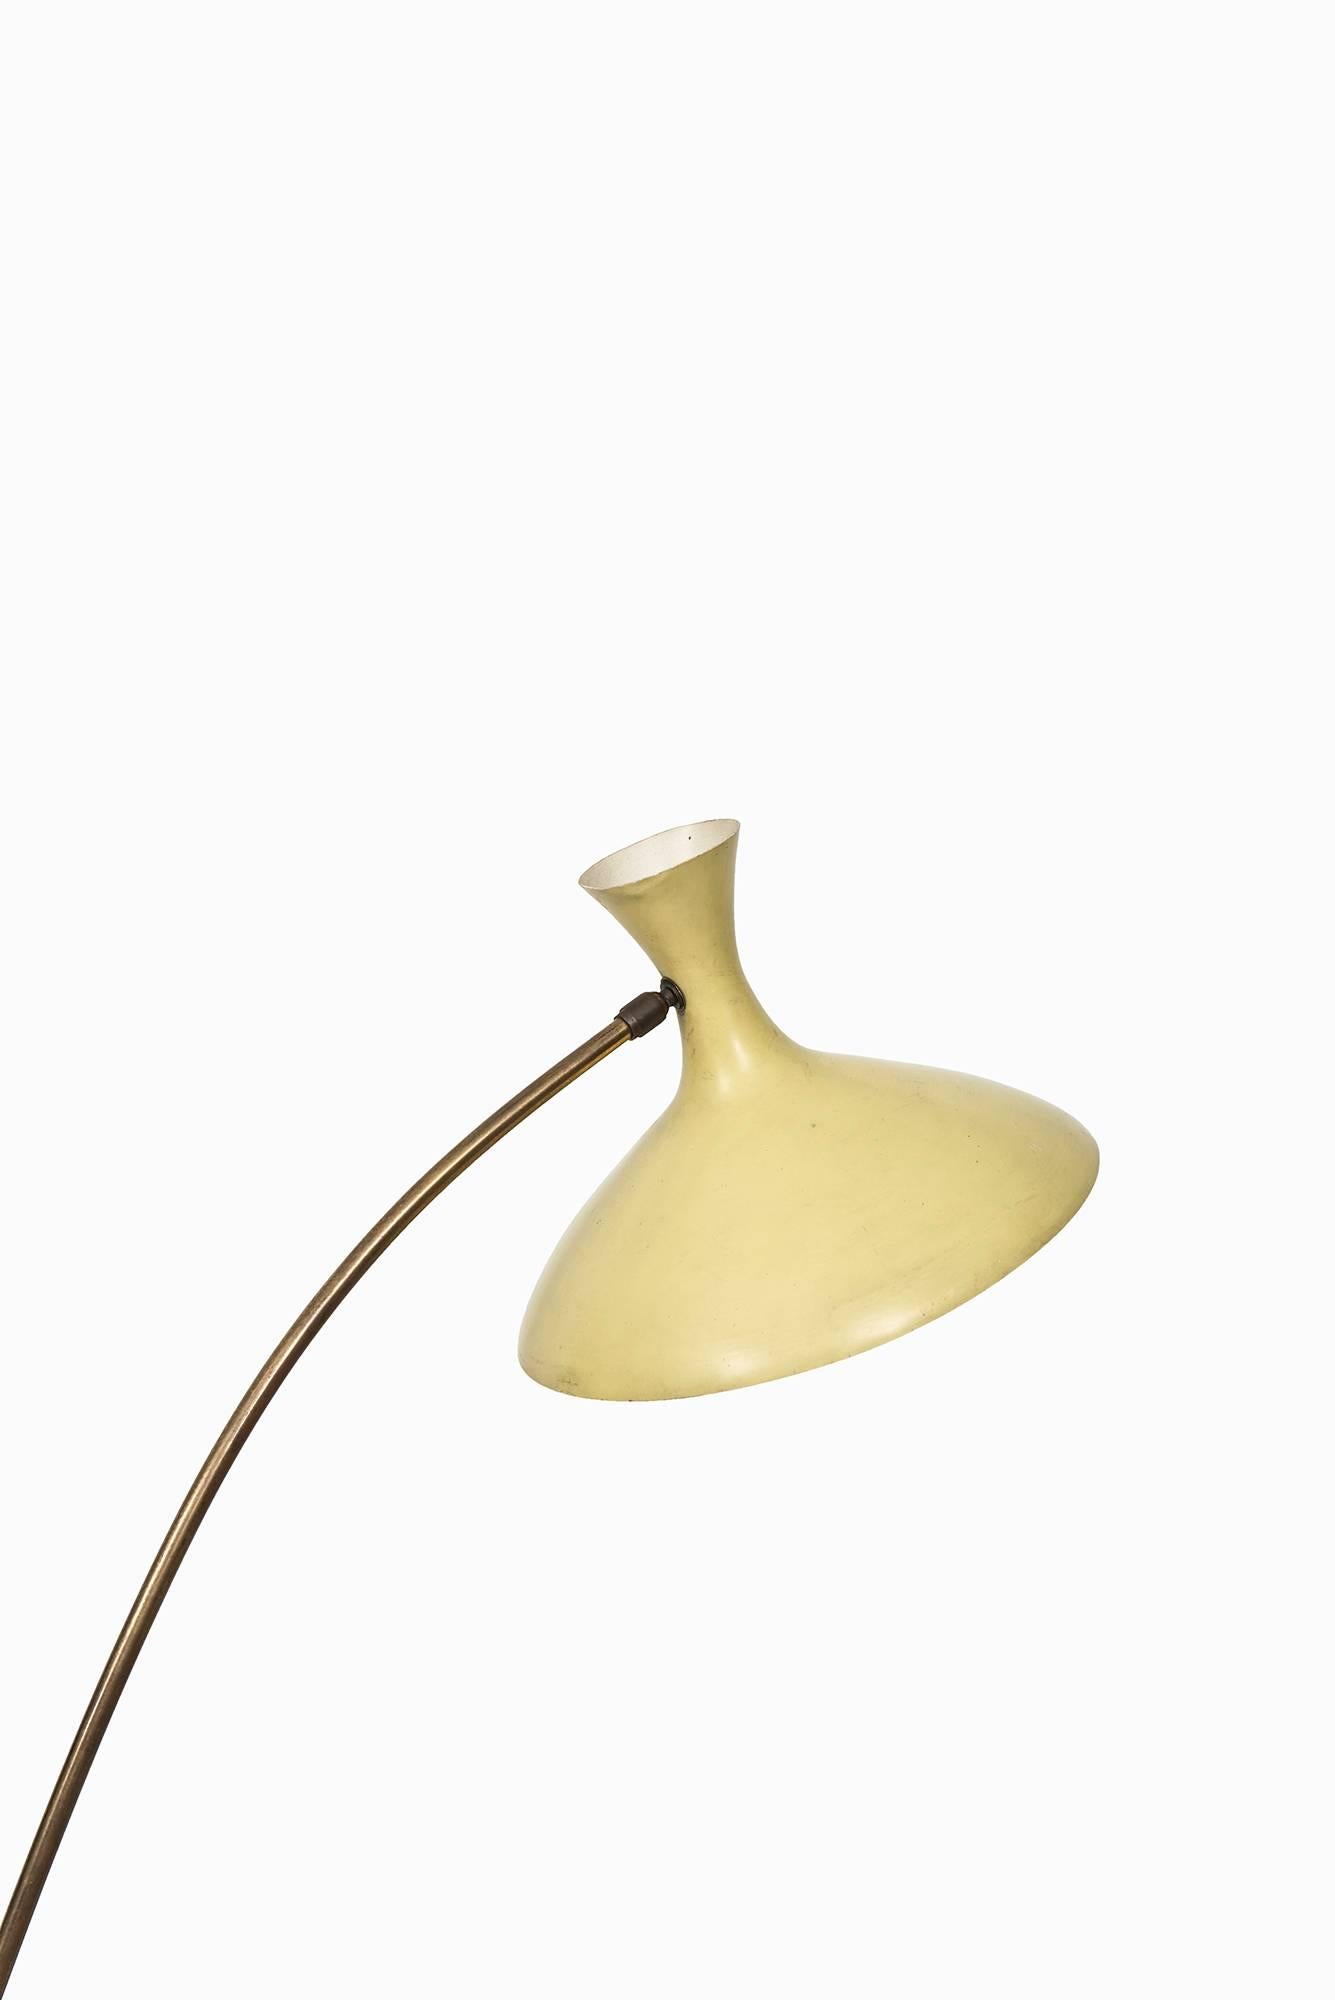 Brass Louis Kalff Floor Lamp Produced by Philips in Germany